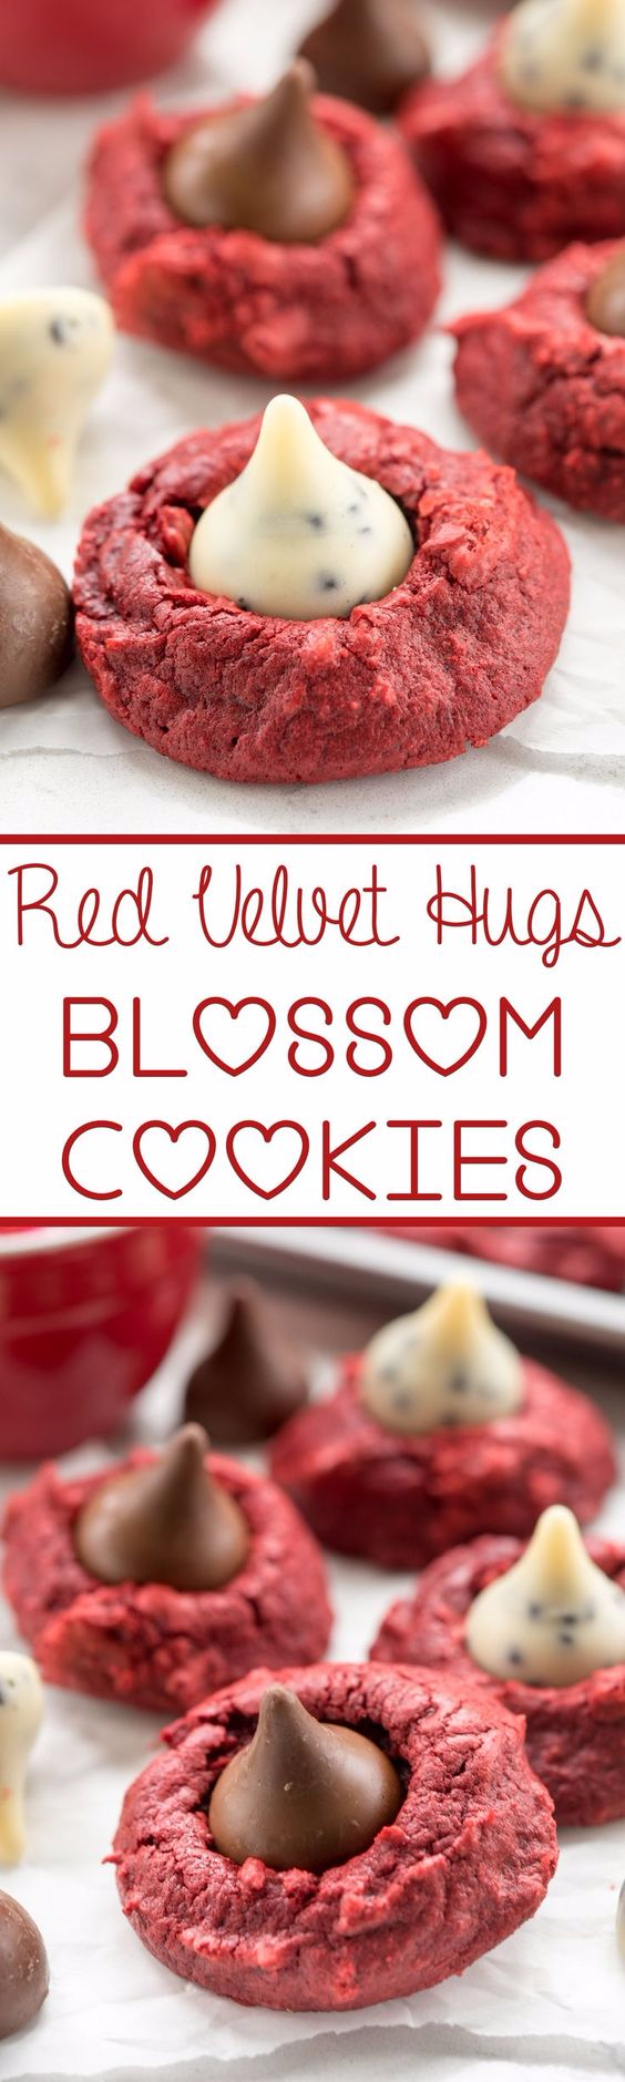 DIY Valentines Day Cookies - Red Velvet Hugs Cookies - Easy Cookie Recipes and Recipe Ideas for Valentines Day - Cute DIY Decorated Cookies for Kids, Homemade Box Cookies and Bouquet Ideas - Sugar Cookie Icing Tutorials With Step by Step Instructions - Quick, Cheap Valentine Gift Ideas for Him and Her http://diyjoy.com/diy-valentines-day-cookie-recipes